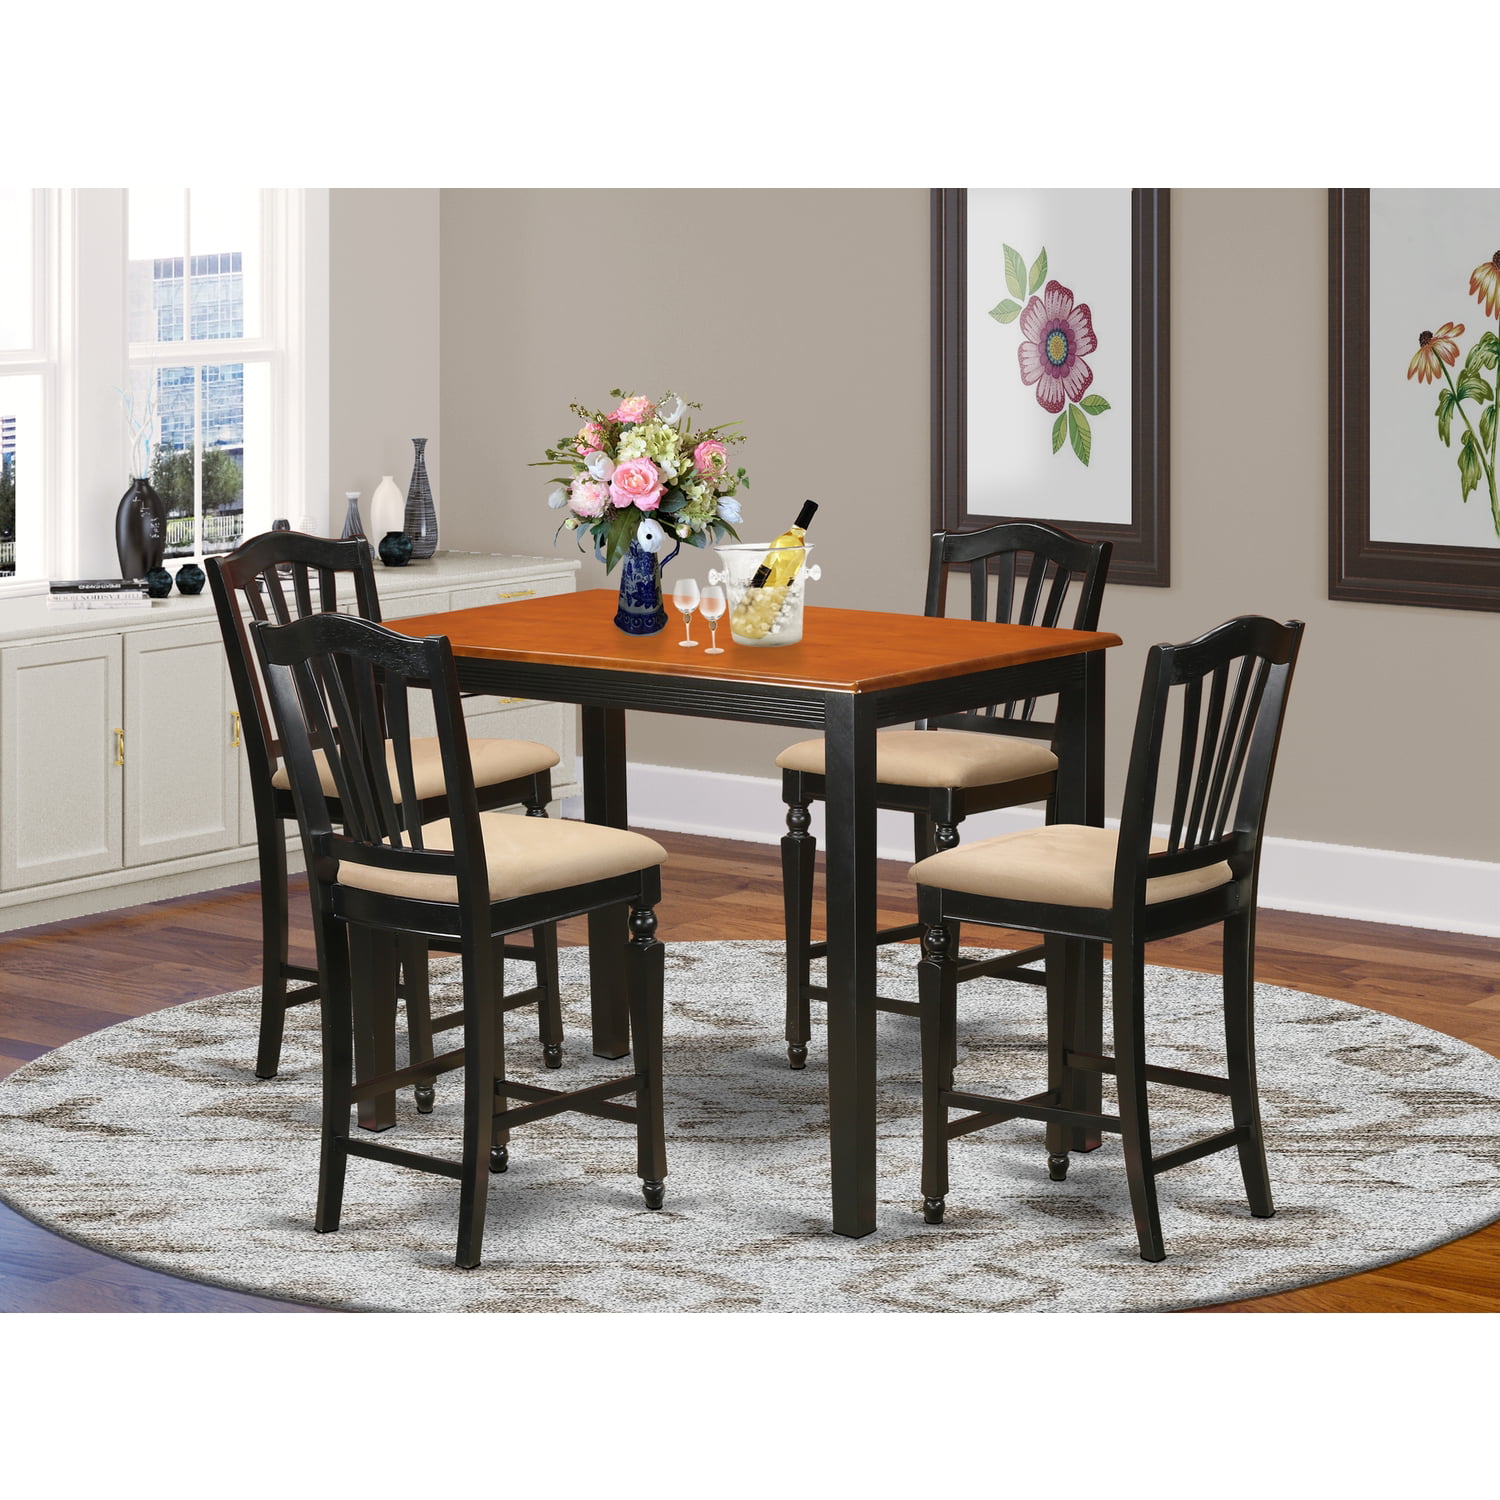 Since sing Neuropathy Dining Counter Height Set-Pub Table And Kitchen Dining Chairs-Finish:Black  & Cherry,Number of Items:5,Shape:Rectangular,Style:Microfiber Seat -  Walmart.com